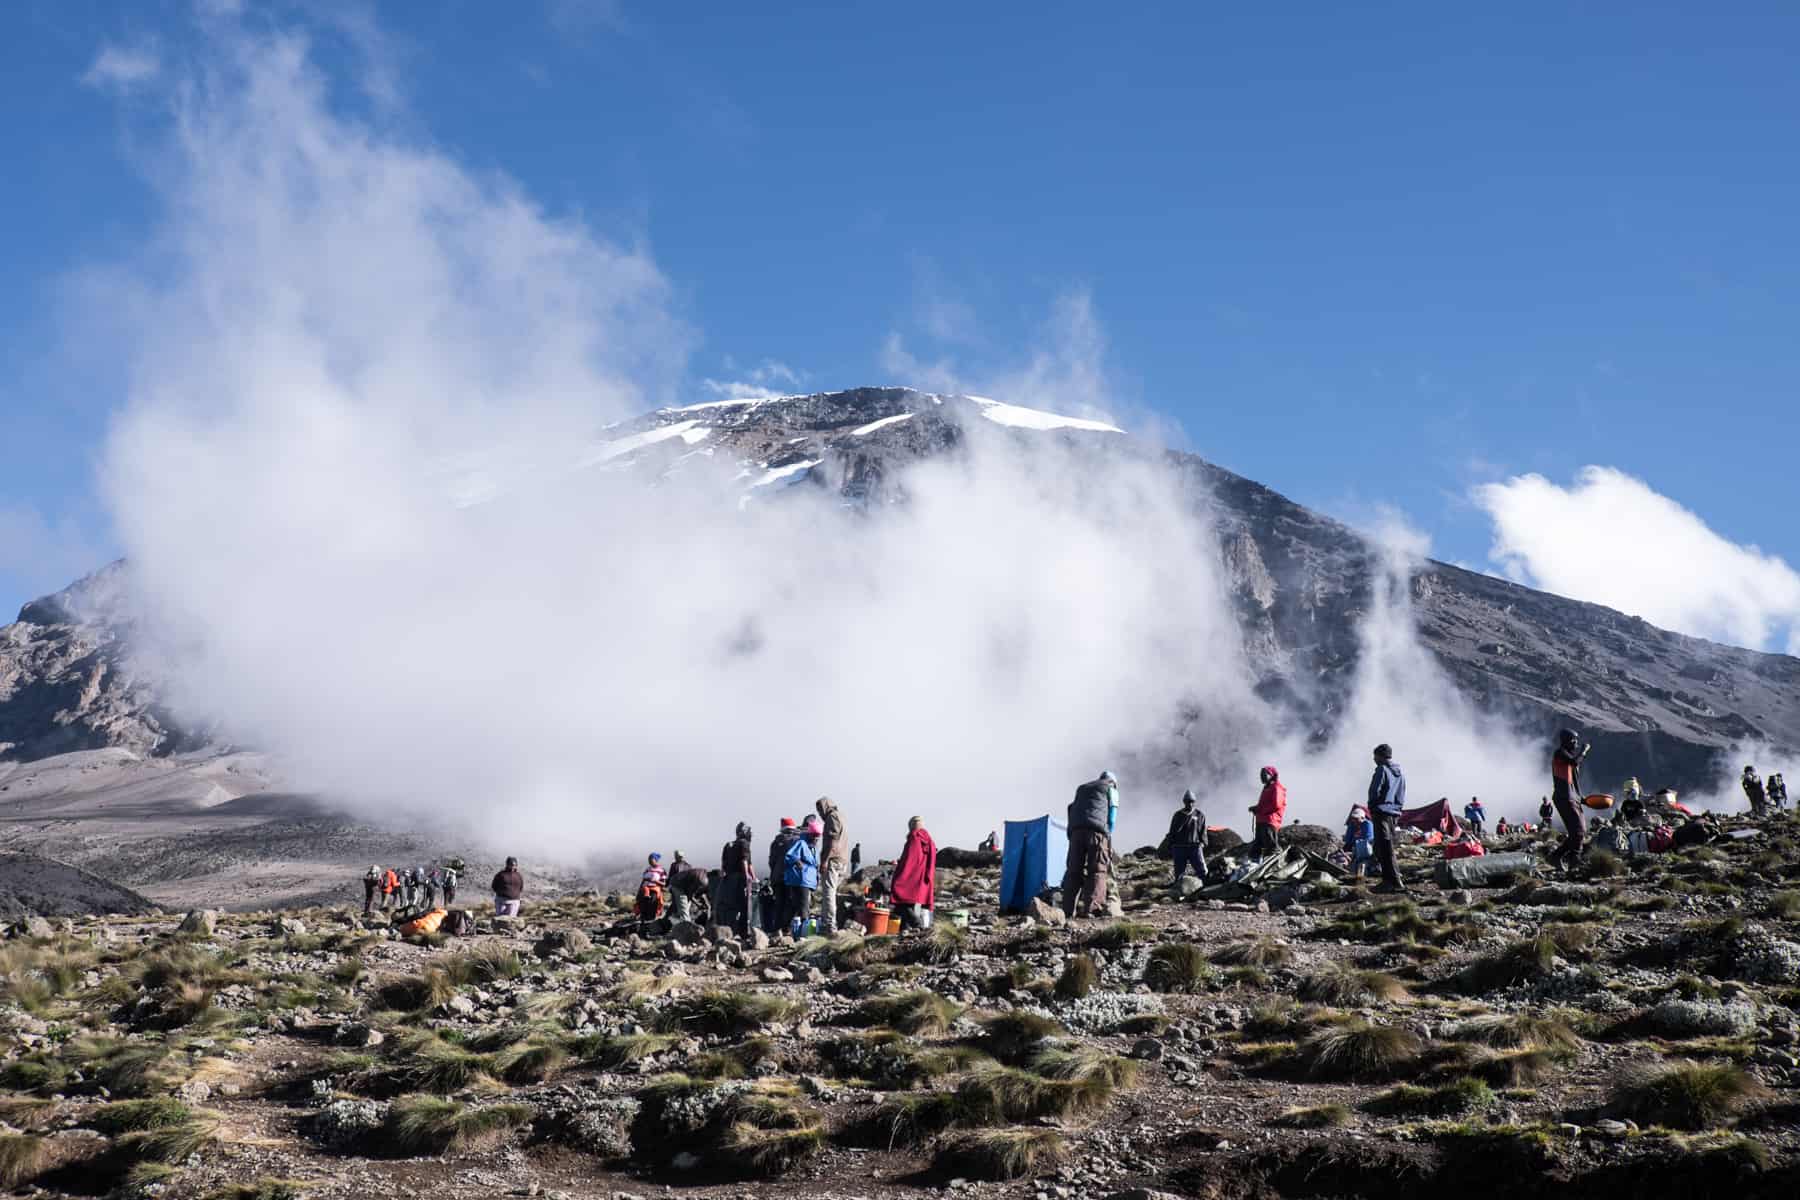 A group of Sherpa's packing away tents on a campsite in front of the looming Mount Kilimanjaro, engulfed in mist.